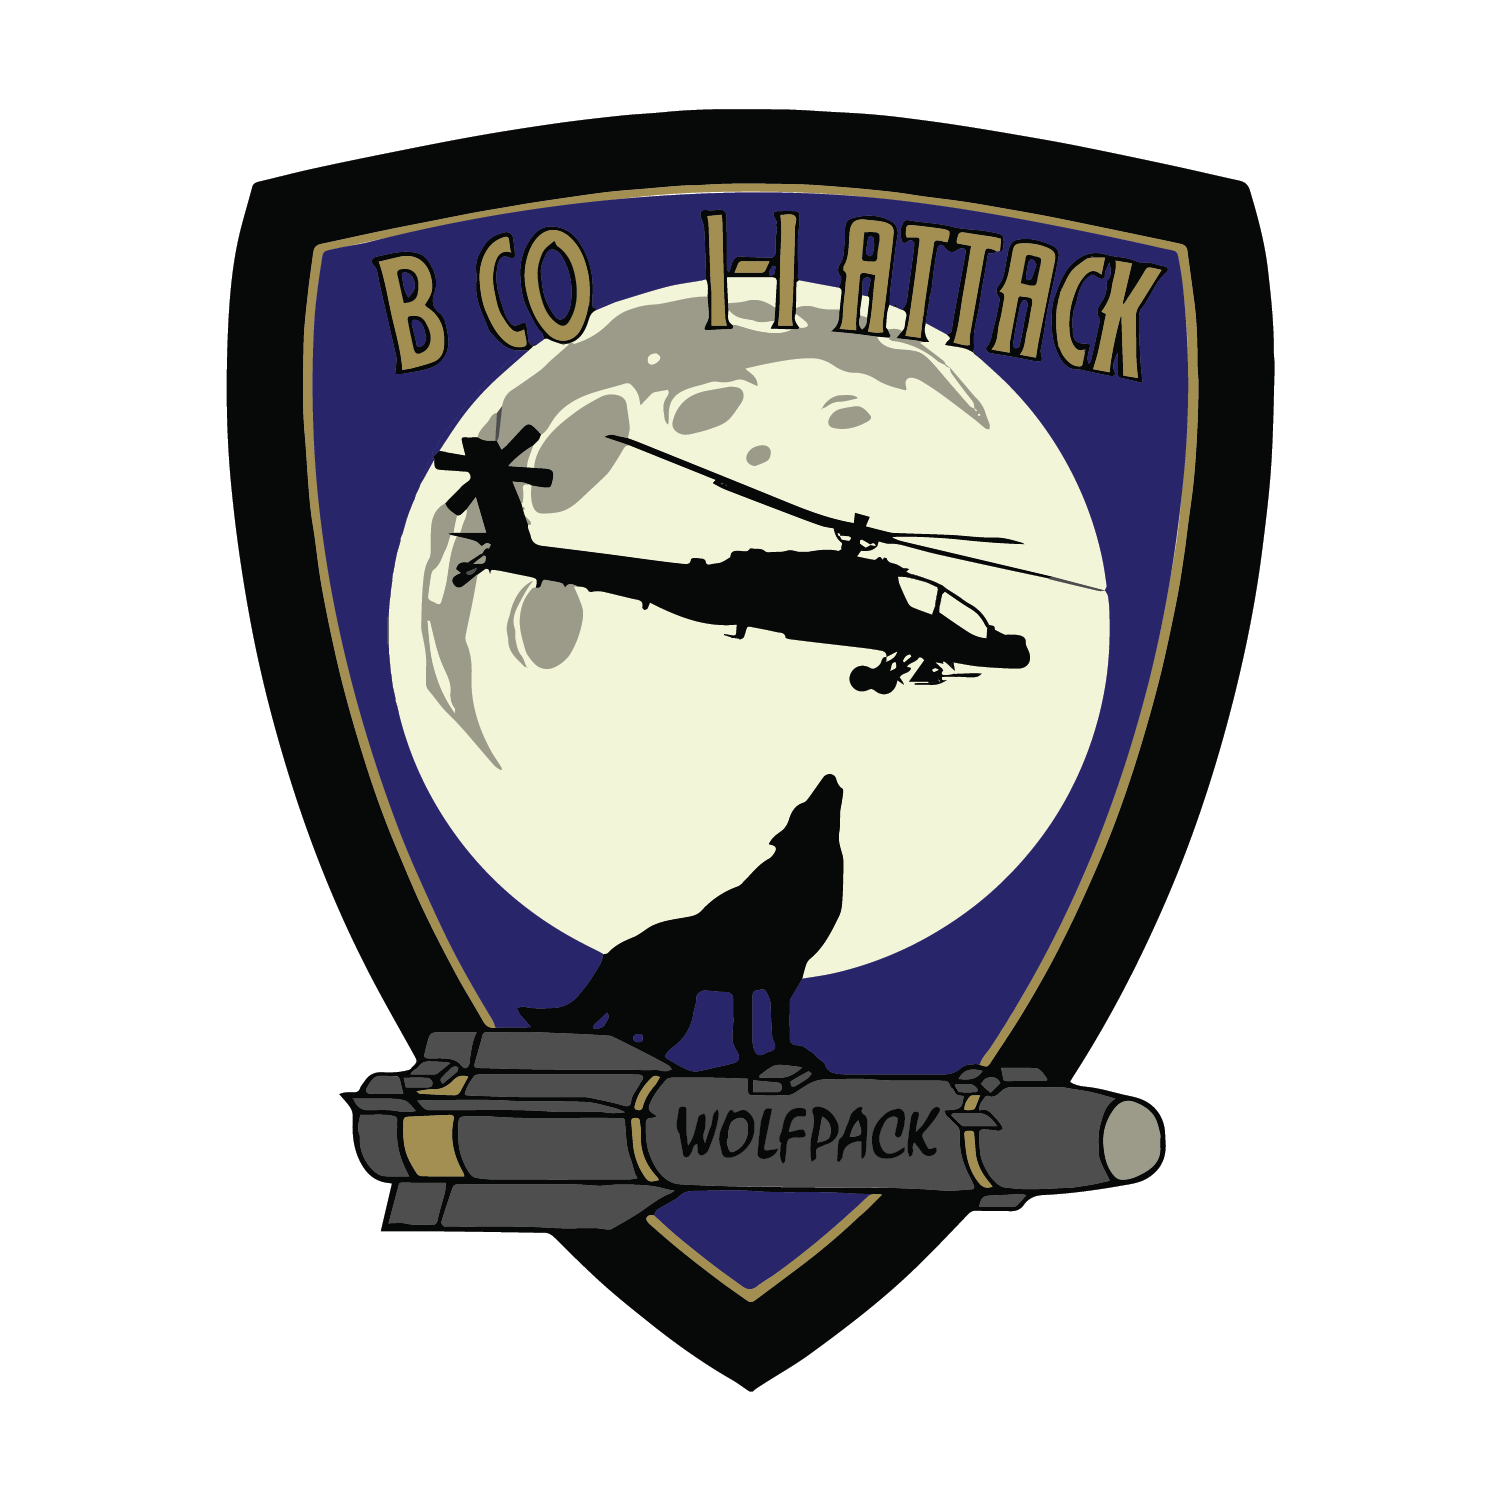 B Co, 1-1 AB "Wolfpack"